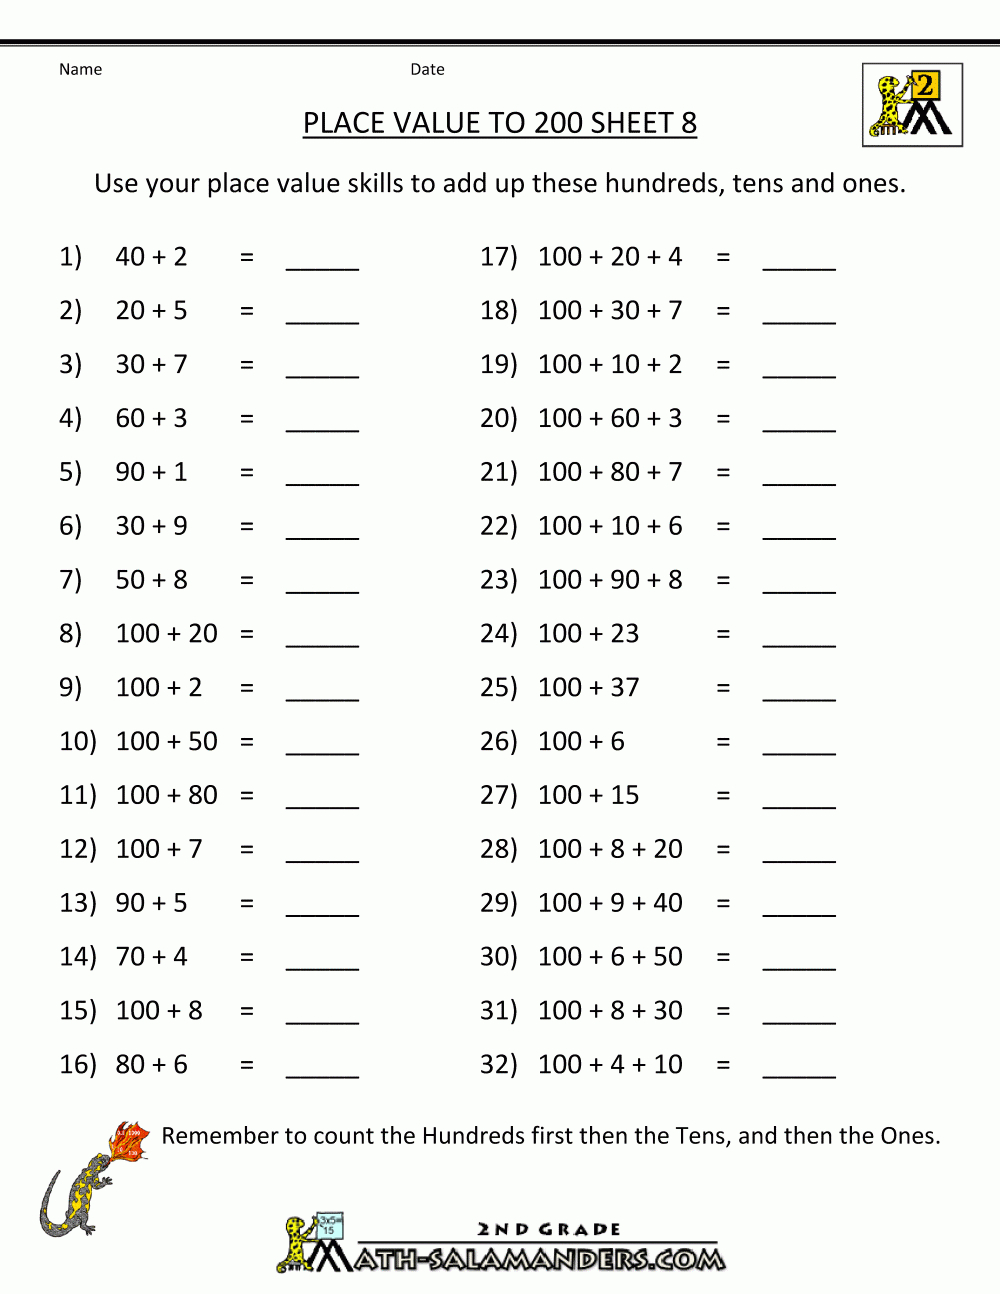 Place Value Worksheet - Numbers To 200 | Free Printable Place Value Worksheets For First Grade